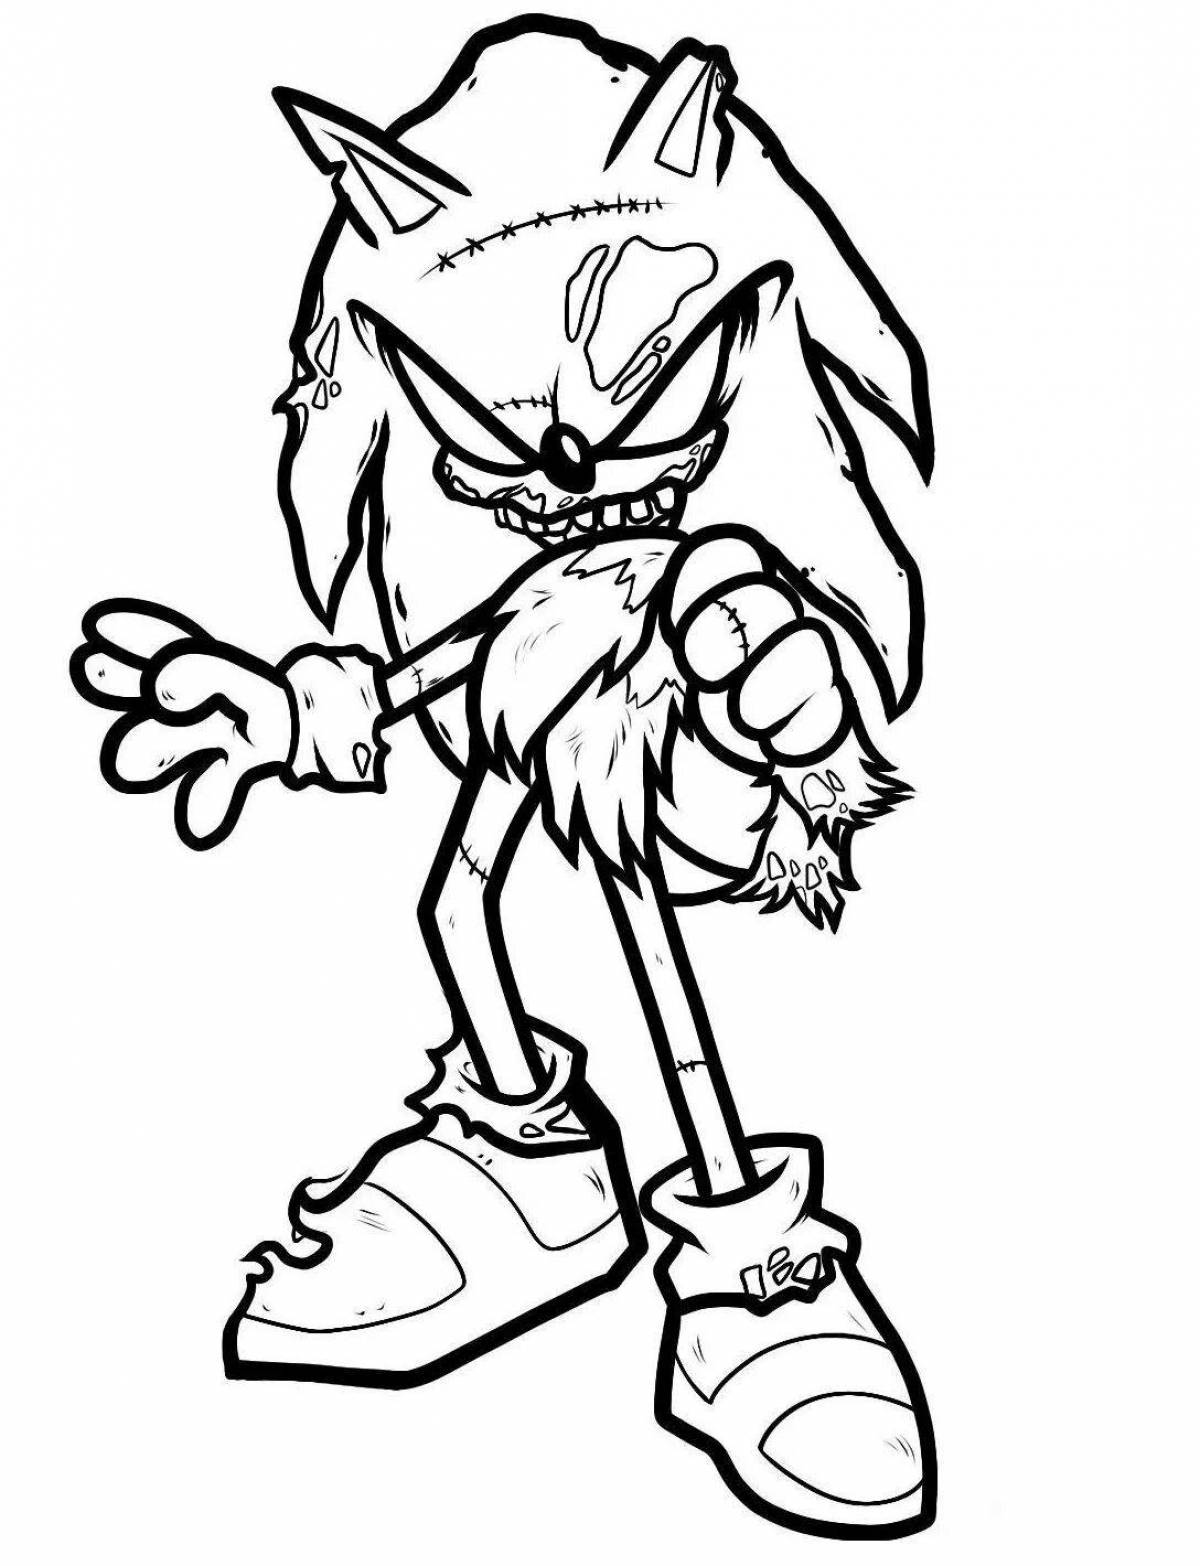 Brave xs sonic coloring page